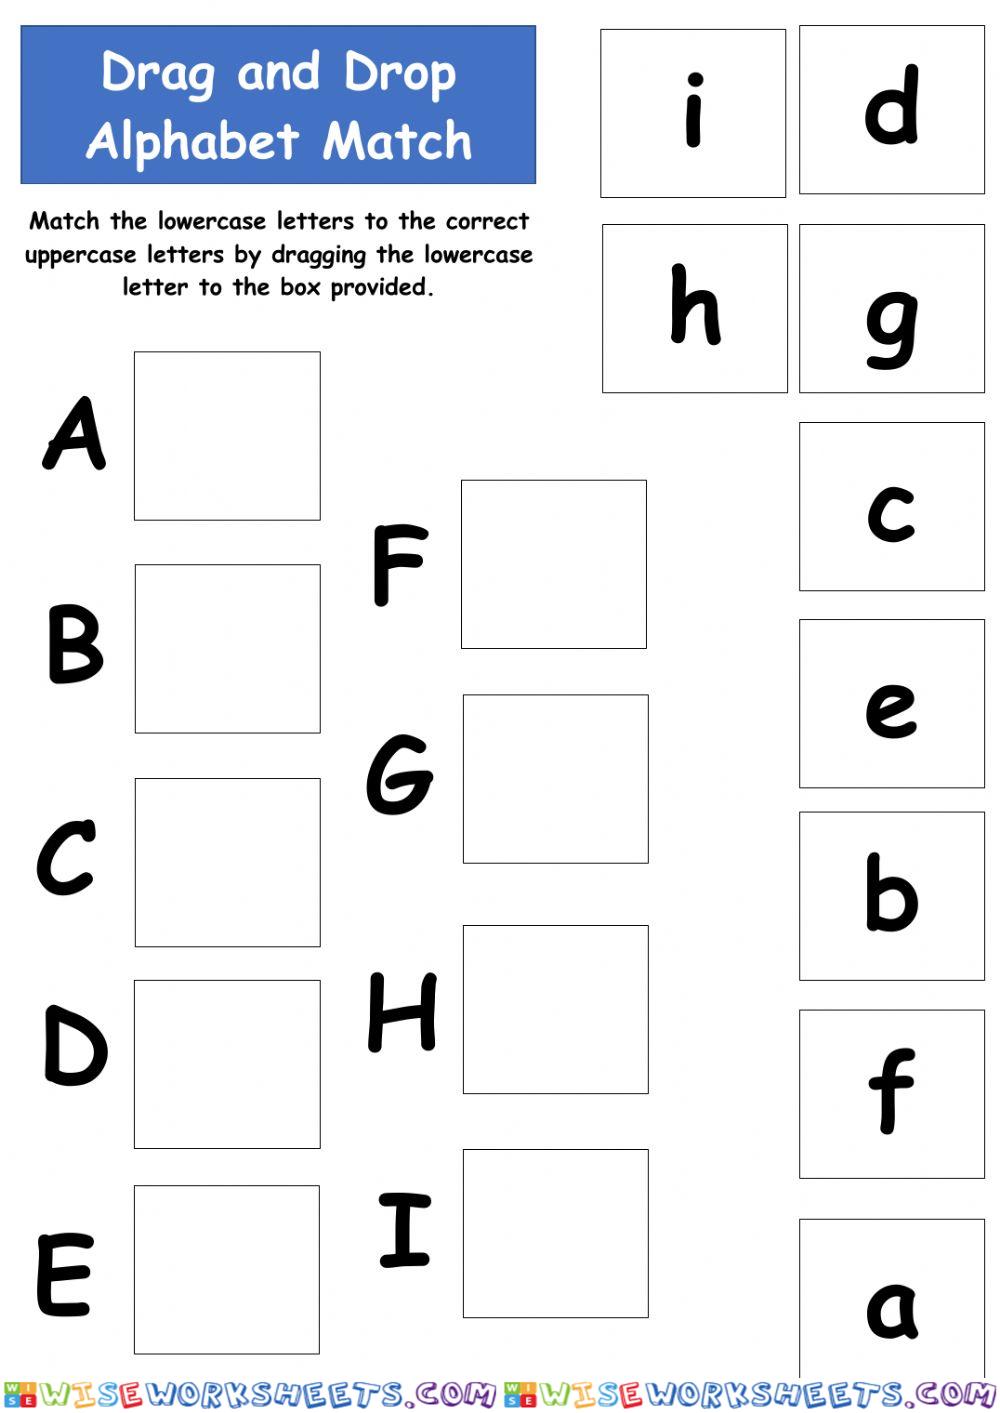 Matching Uppercase and Lowercase Alphabets A-I